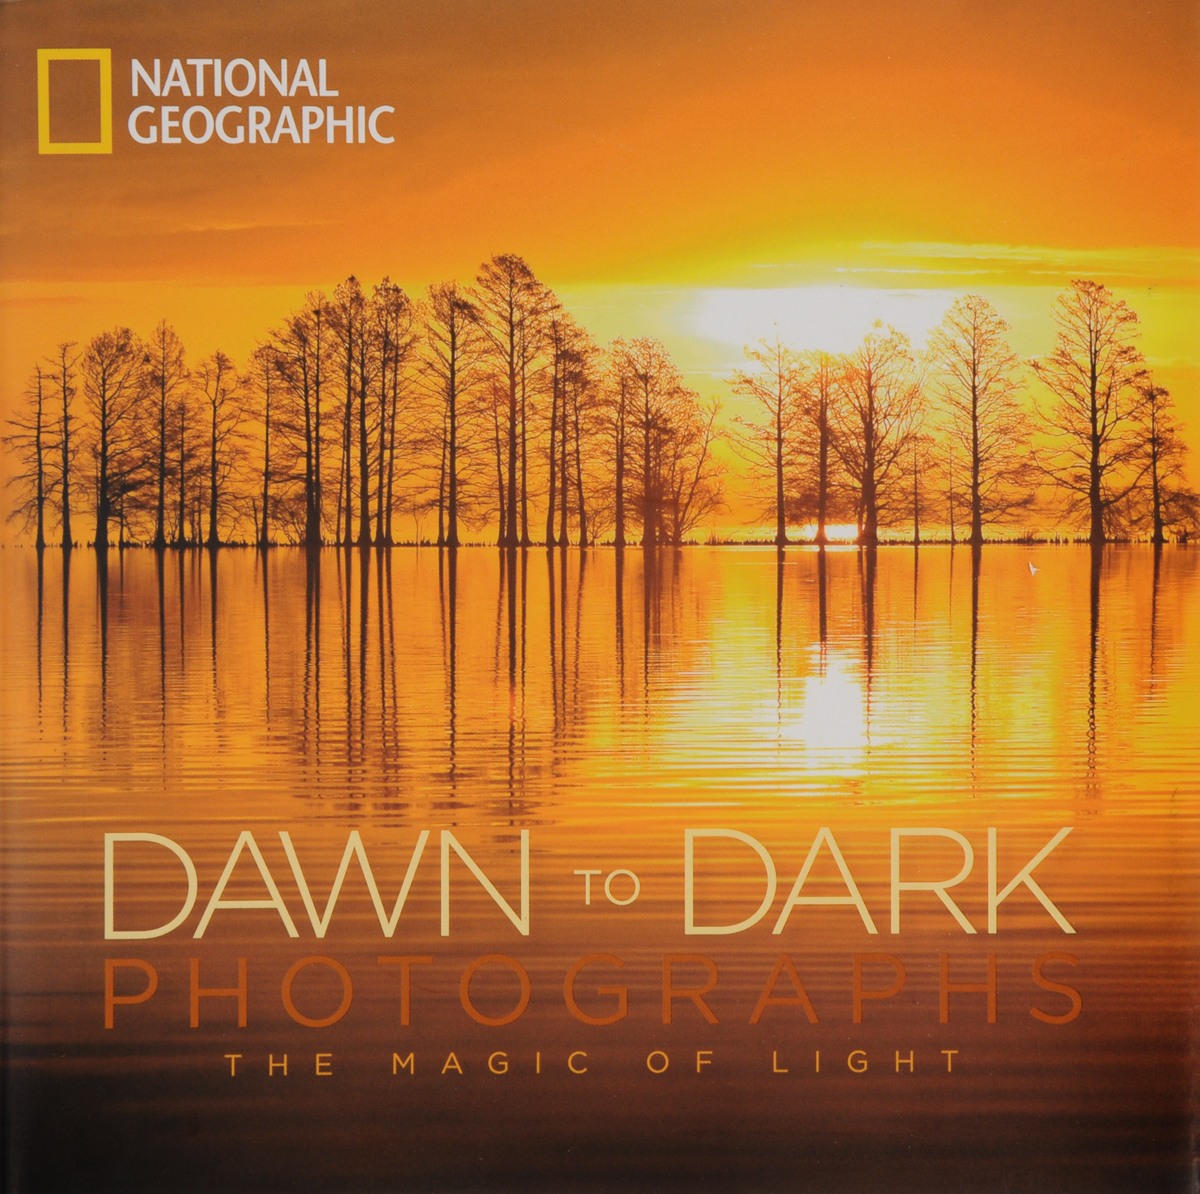 National Geographic: Dawn to Dark Photographs: The Magic of Light